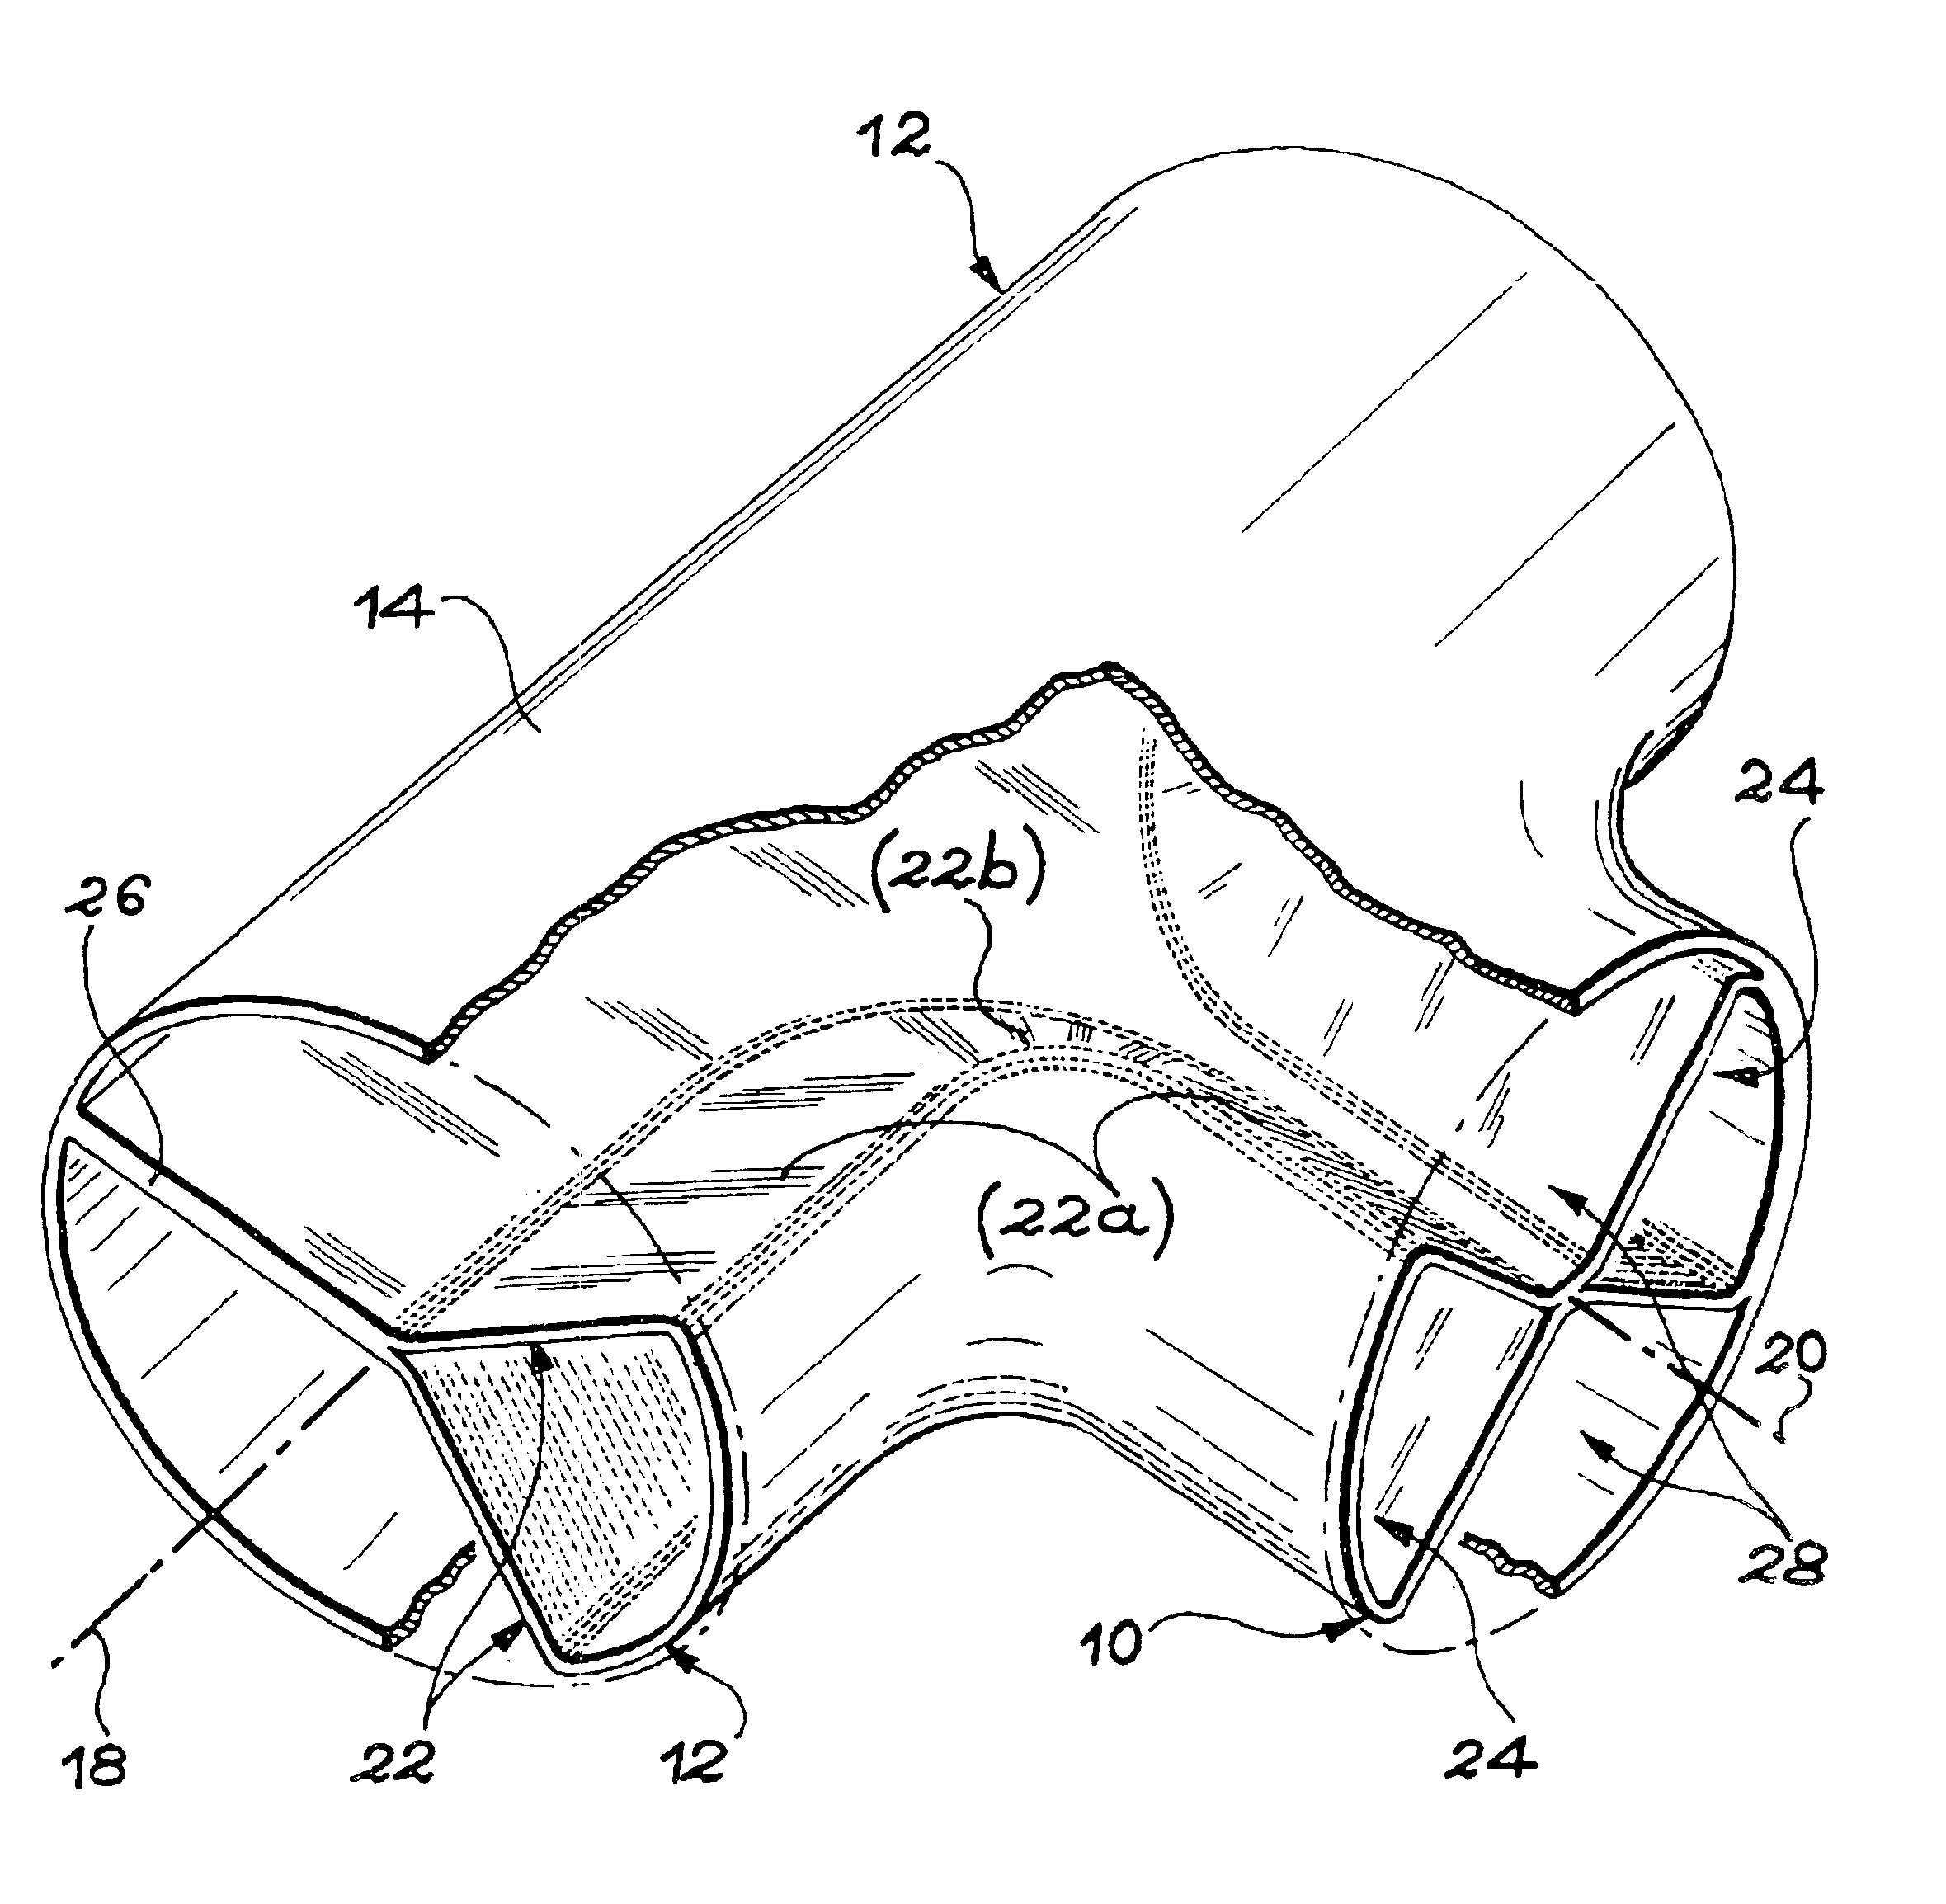 Thin walled compartmented tubular structure and its manufacturing process